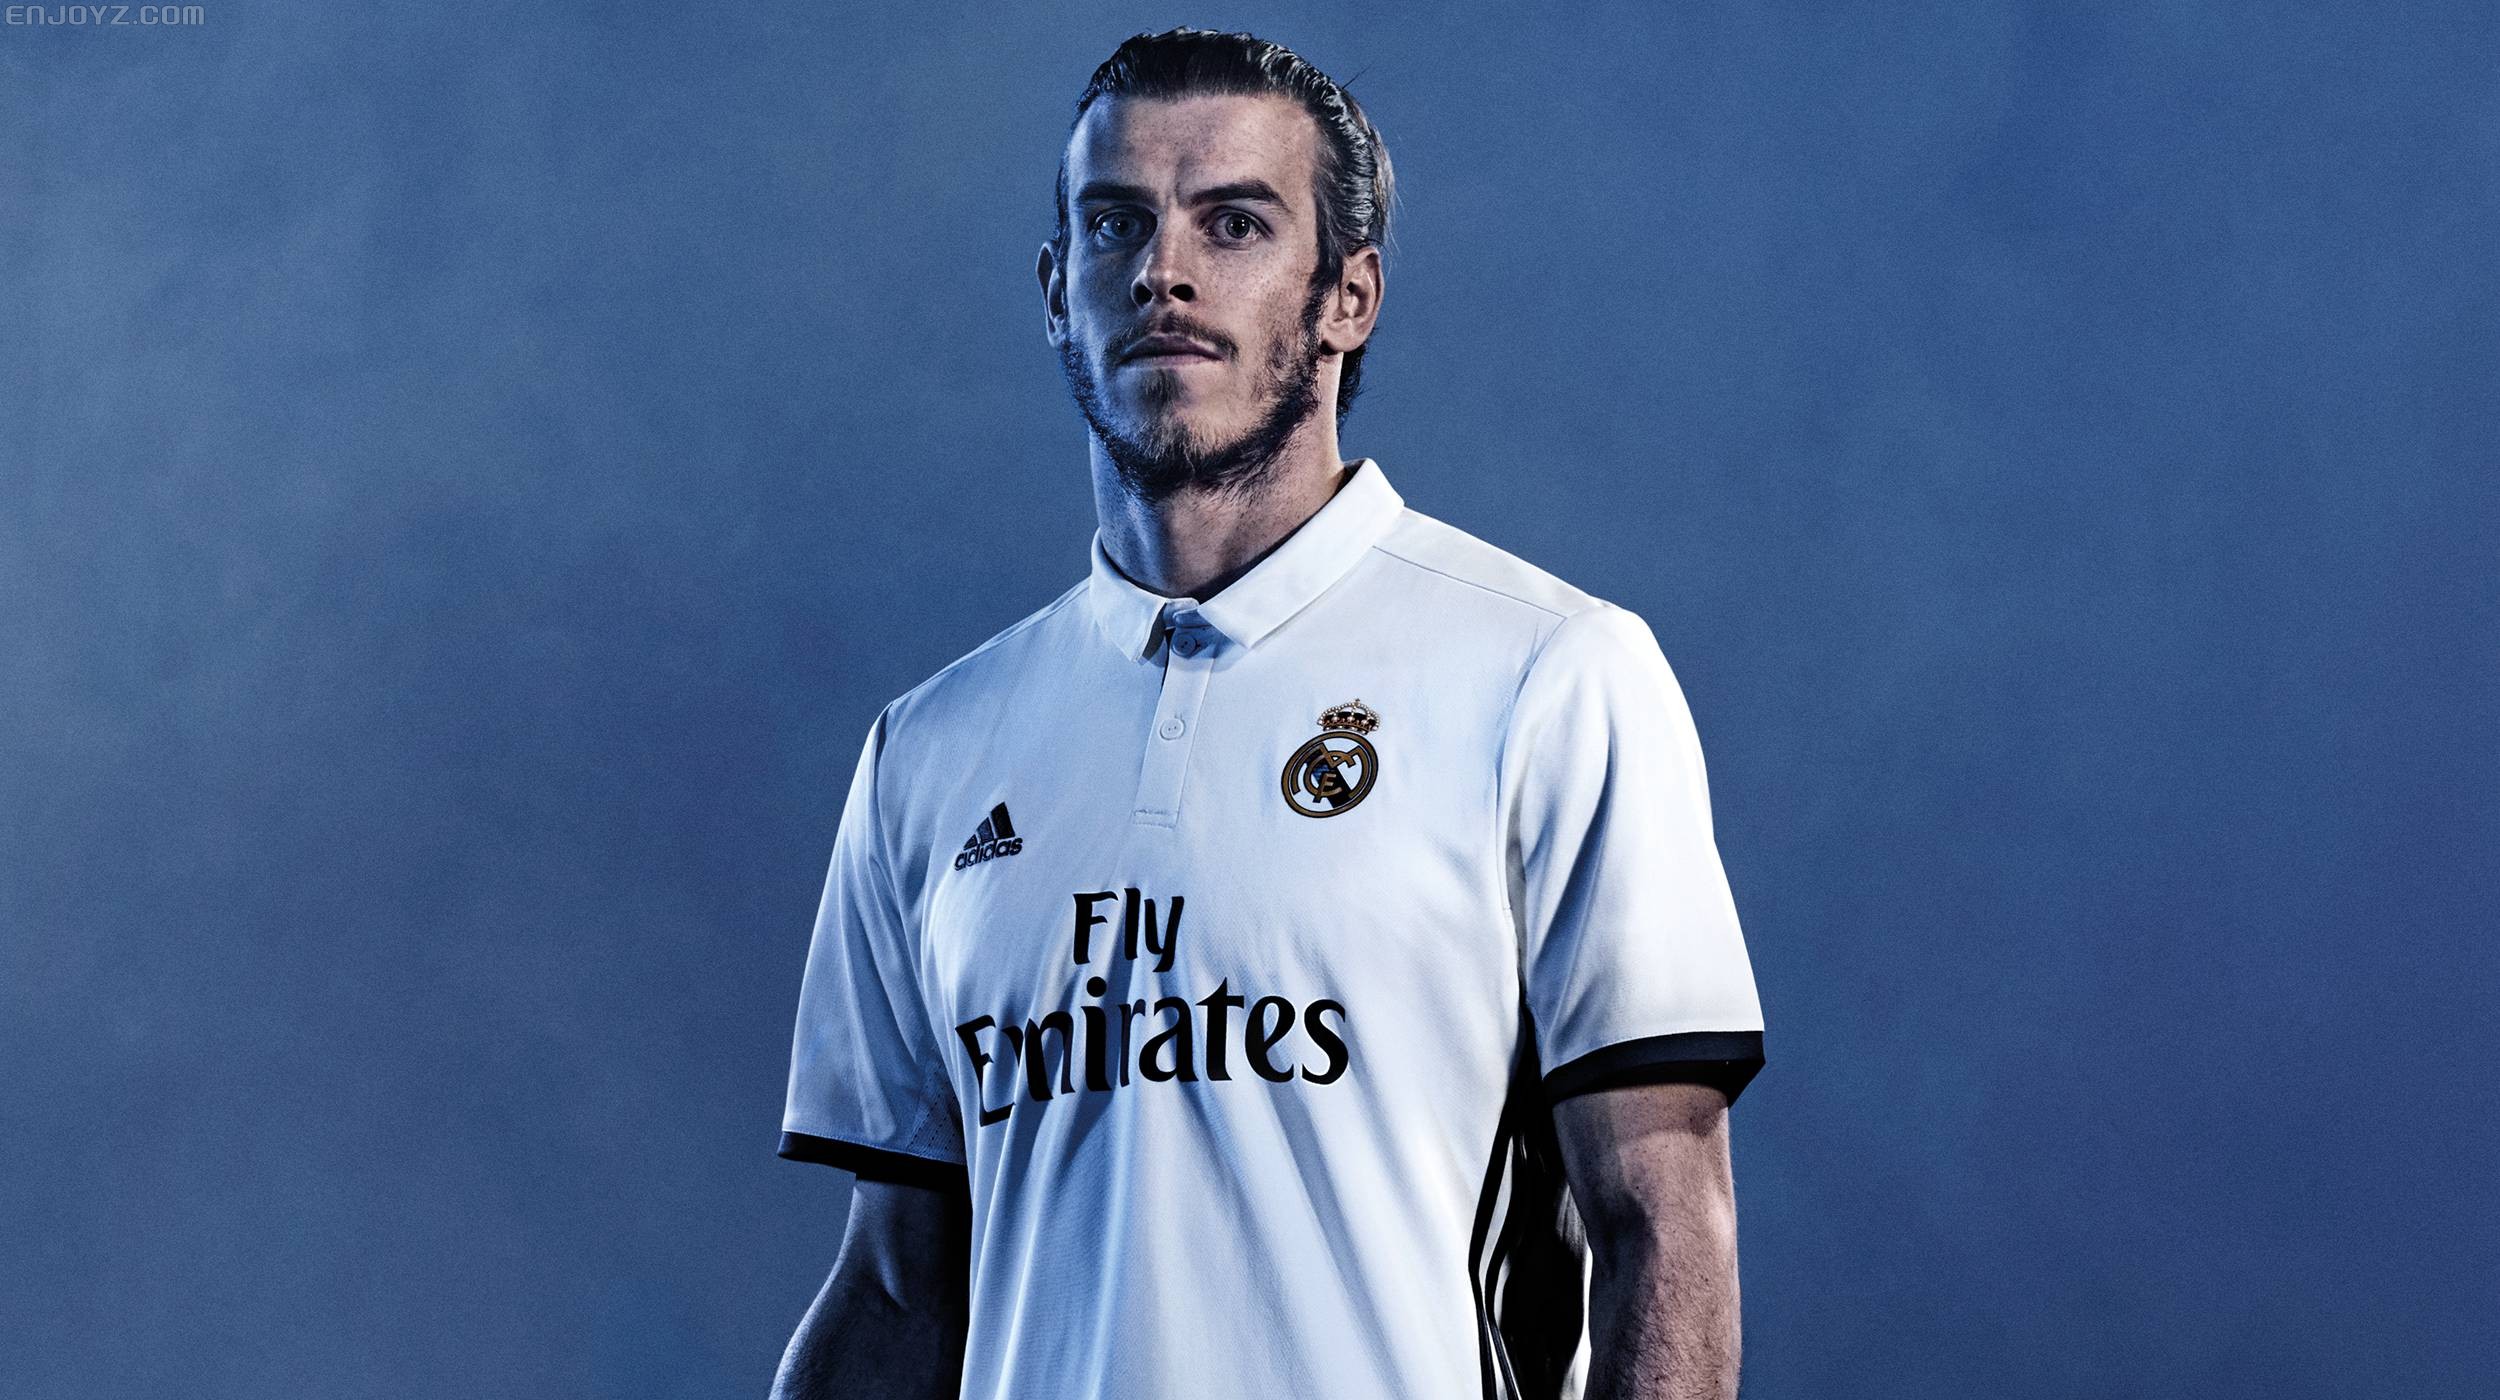 Real Madrid 2016/17 Home Kit Released